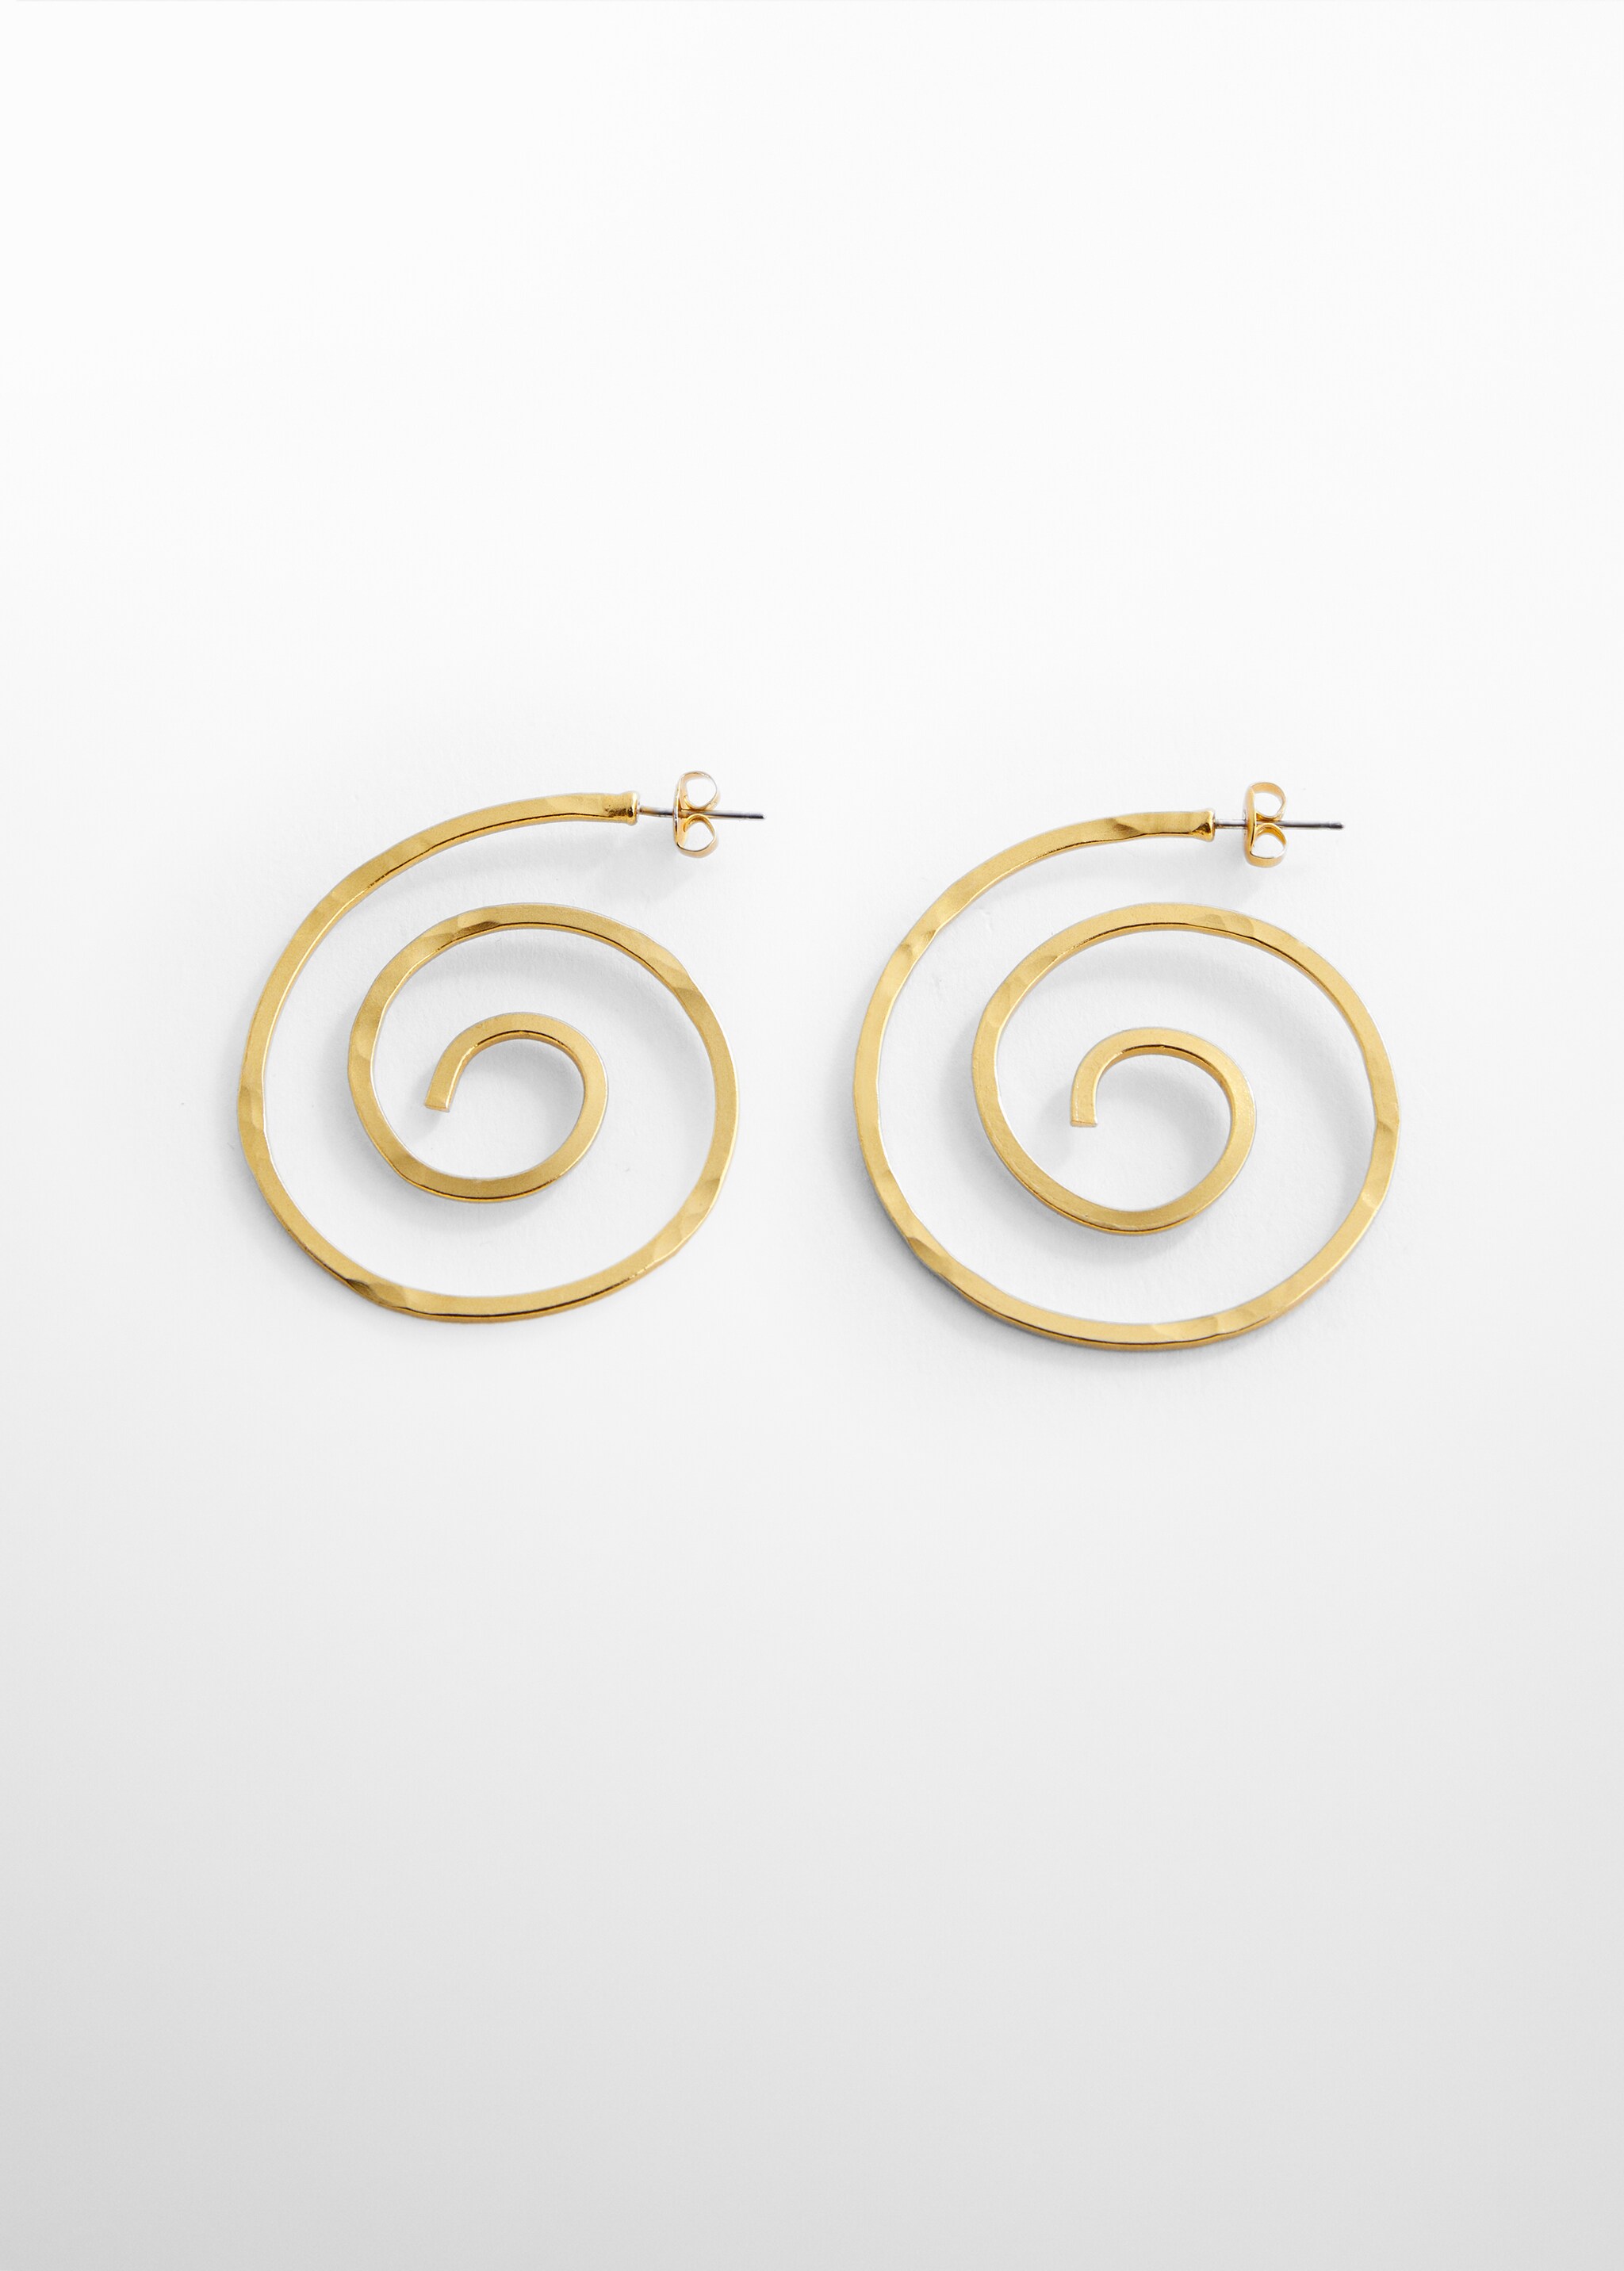 Spiral hoop earrings - Article without model